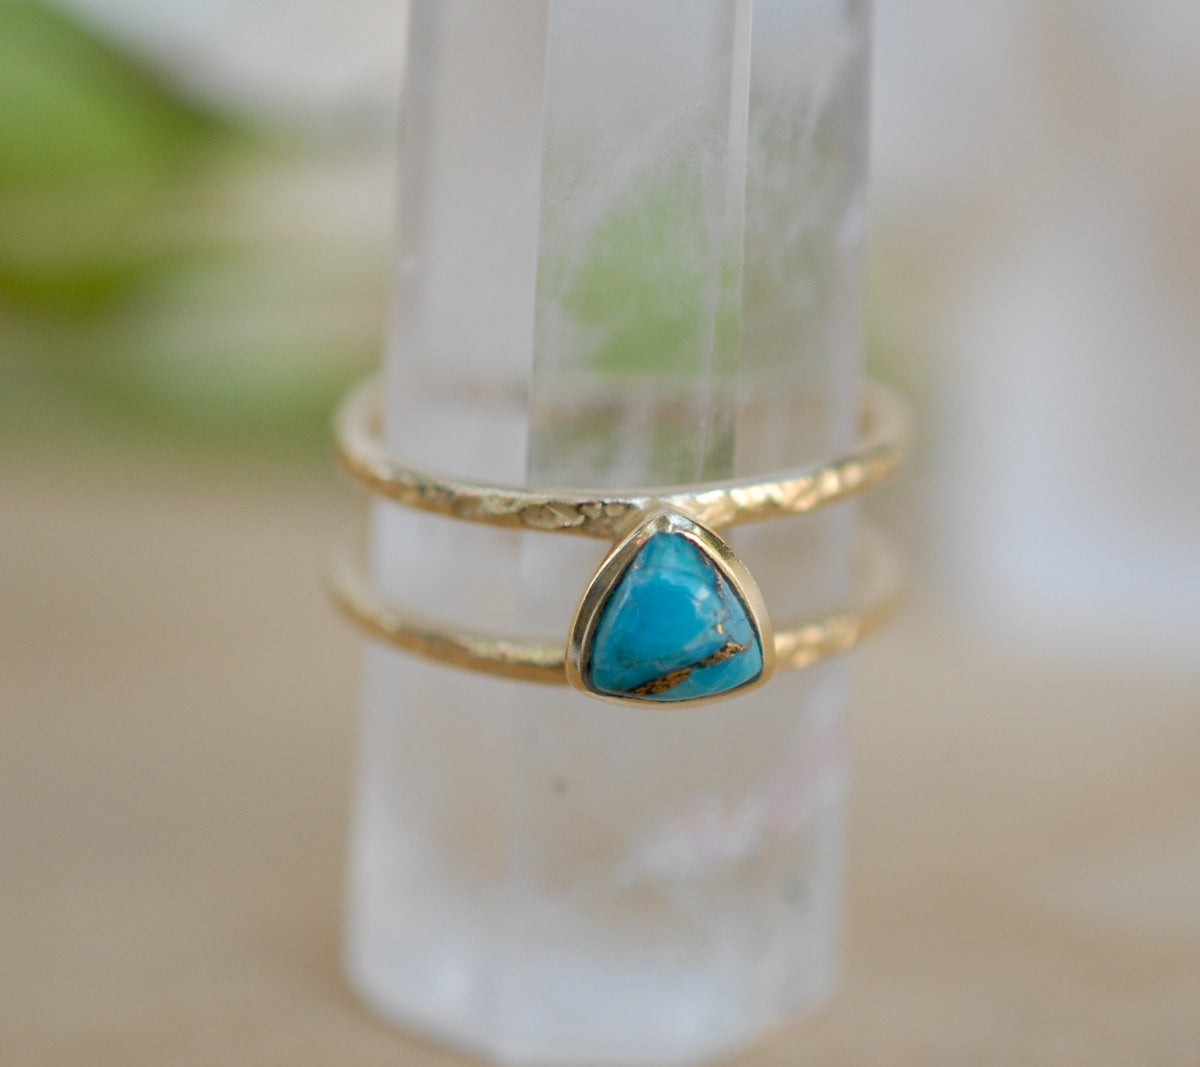 Copper Turquoise Ring * Triangle Gold* Statement * Gemstone * Turquoise Ring * Bridal *Wedding* Organic *Natural * Triangular BJR085